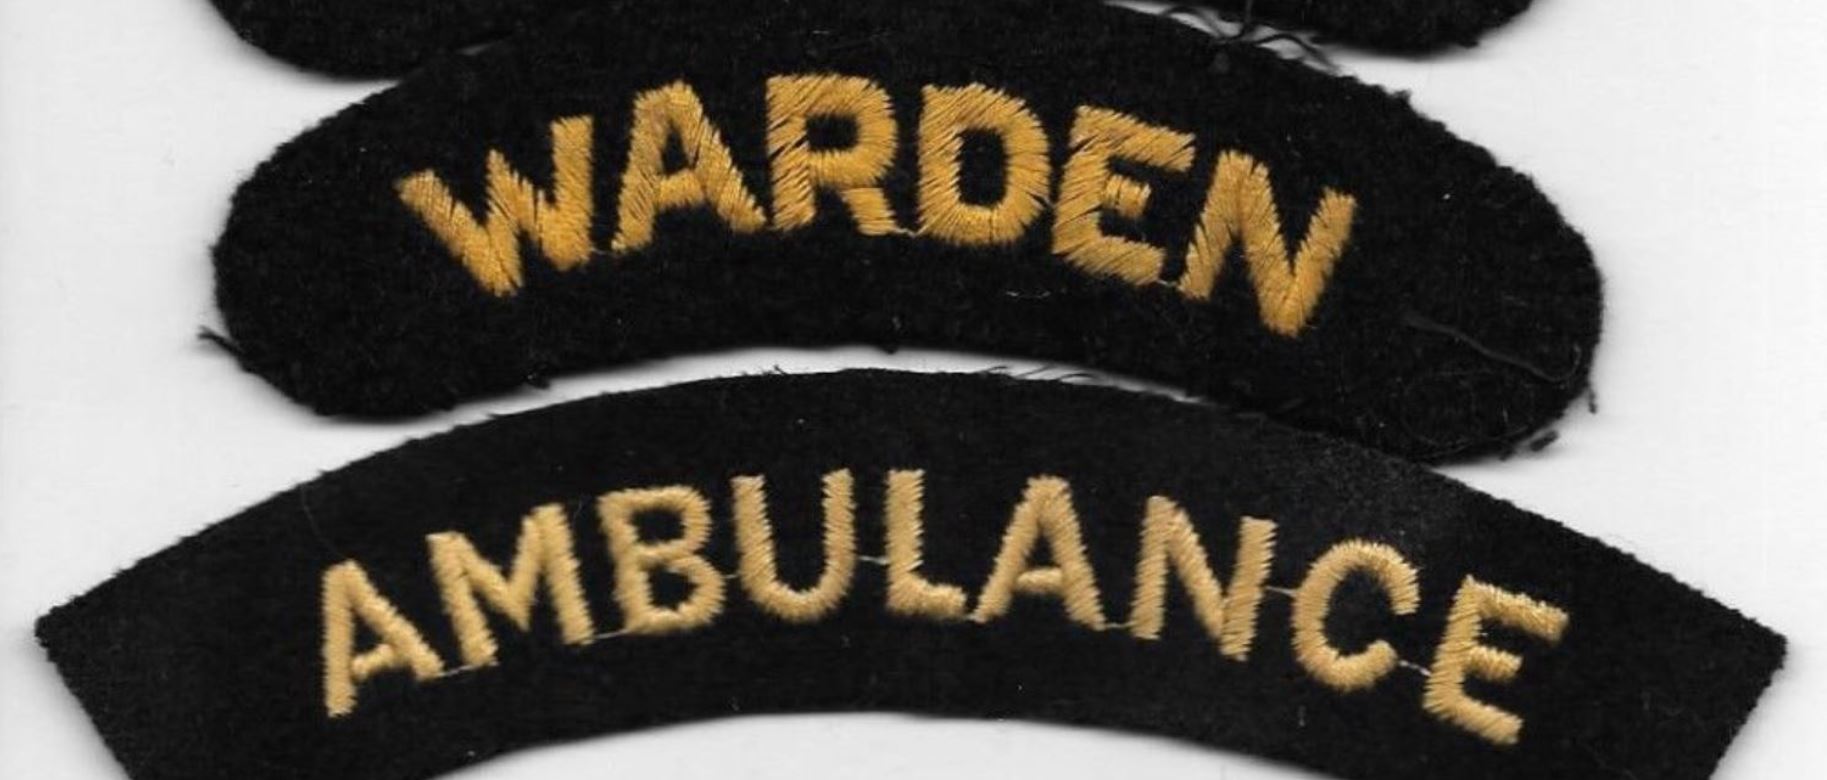 Comparison of the thread colour for a WW2 'old gold' colour (Warden) and post-war Civil Defence Corps 'yellow' (Ambulance) stitching 